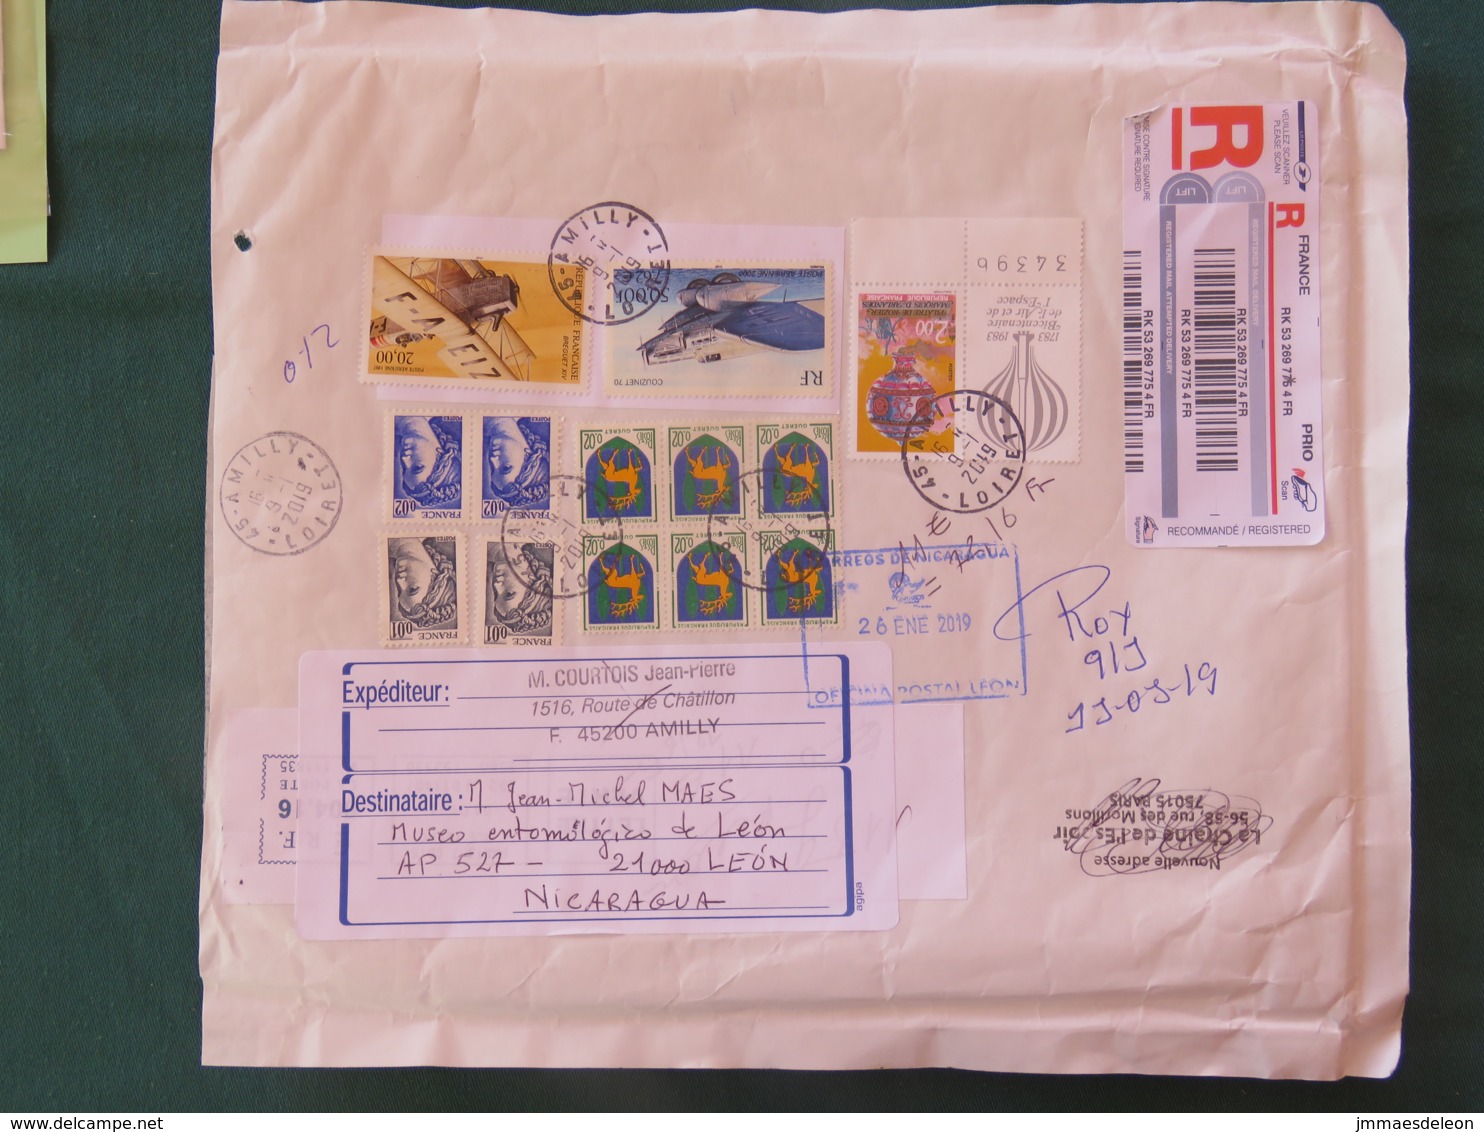 France 2019 Registered Cover To Nicaragua - Planes Balloon Arms Deer Sabine - Covers & Documents